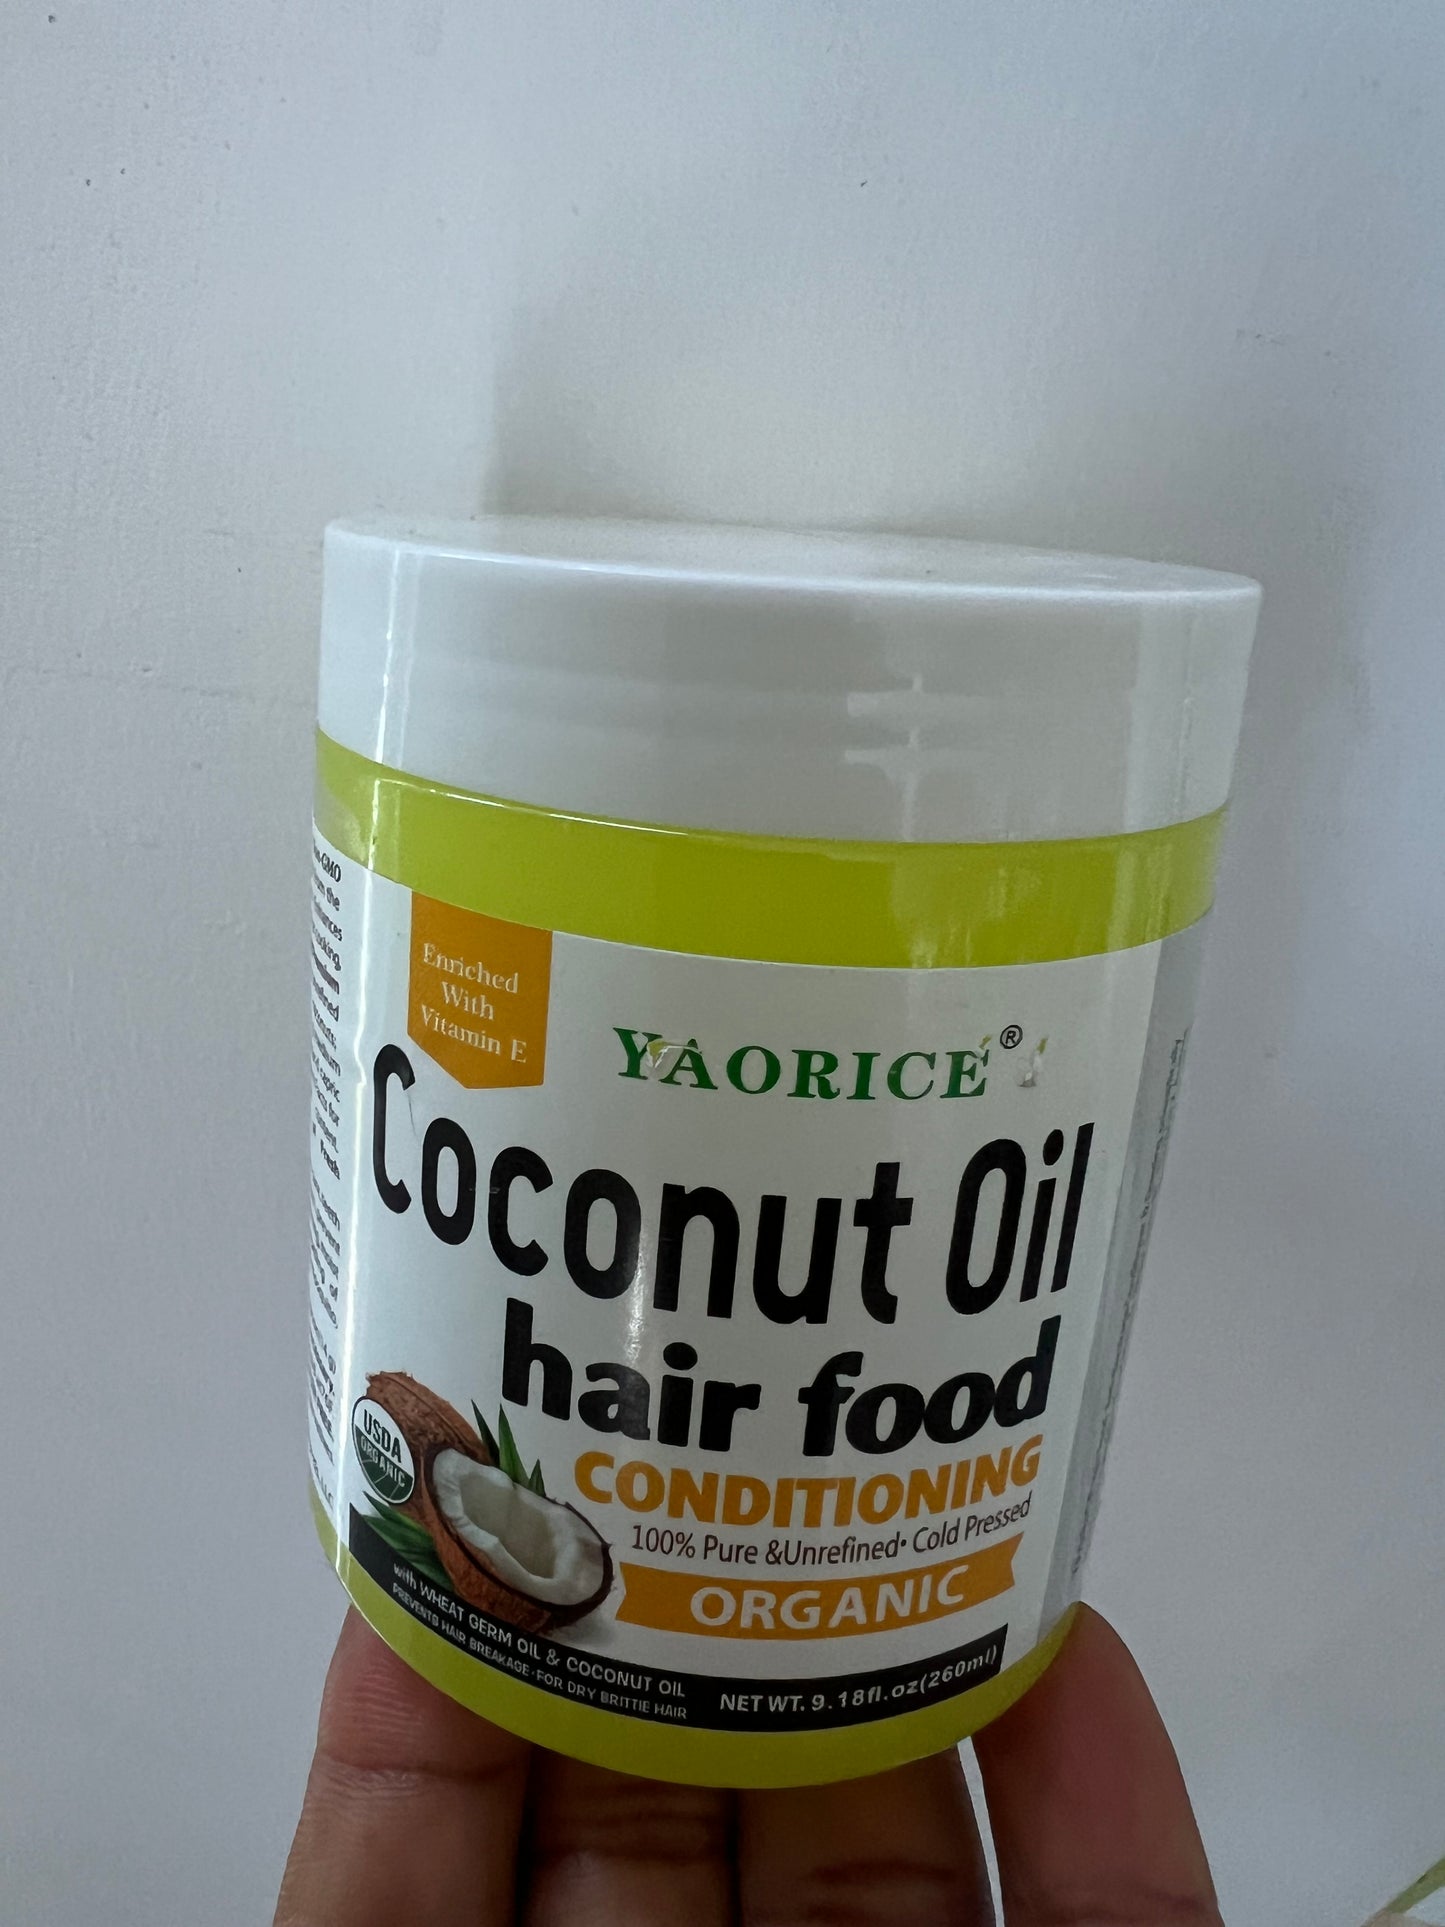 Coconut oil hair food anti breakage blue and food Conditioning Yellow